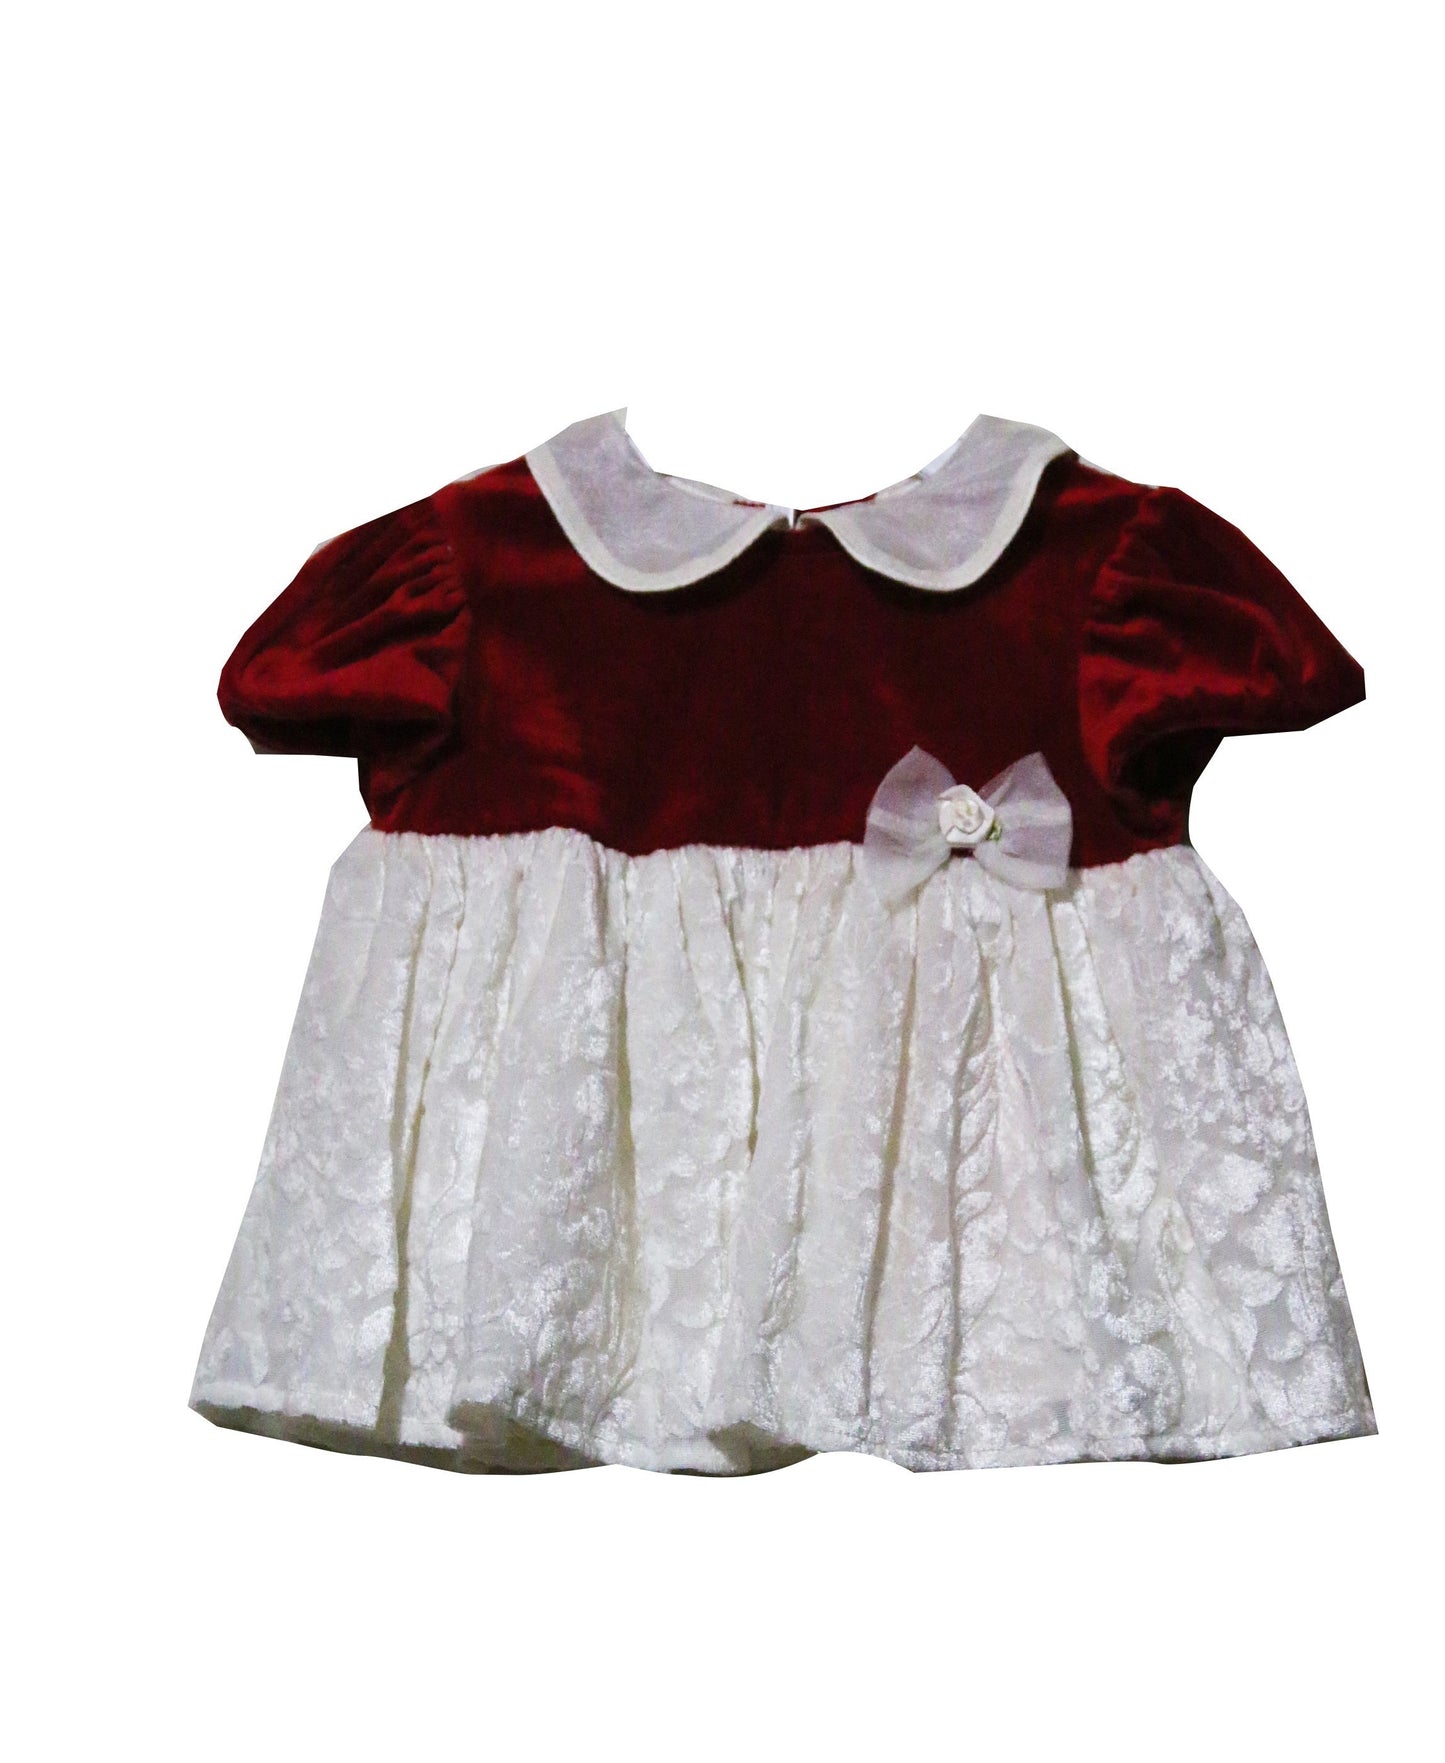 Baby Christmas Dress With Bow